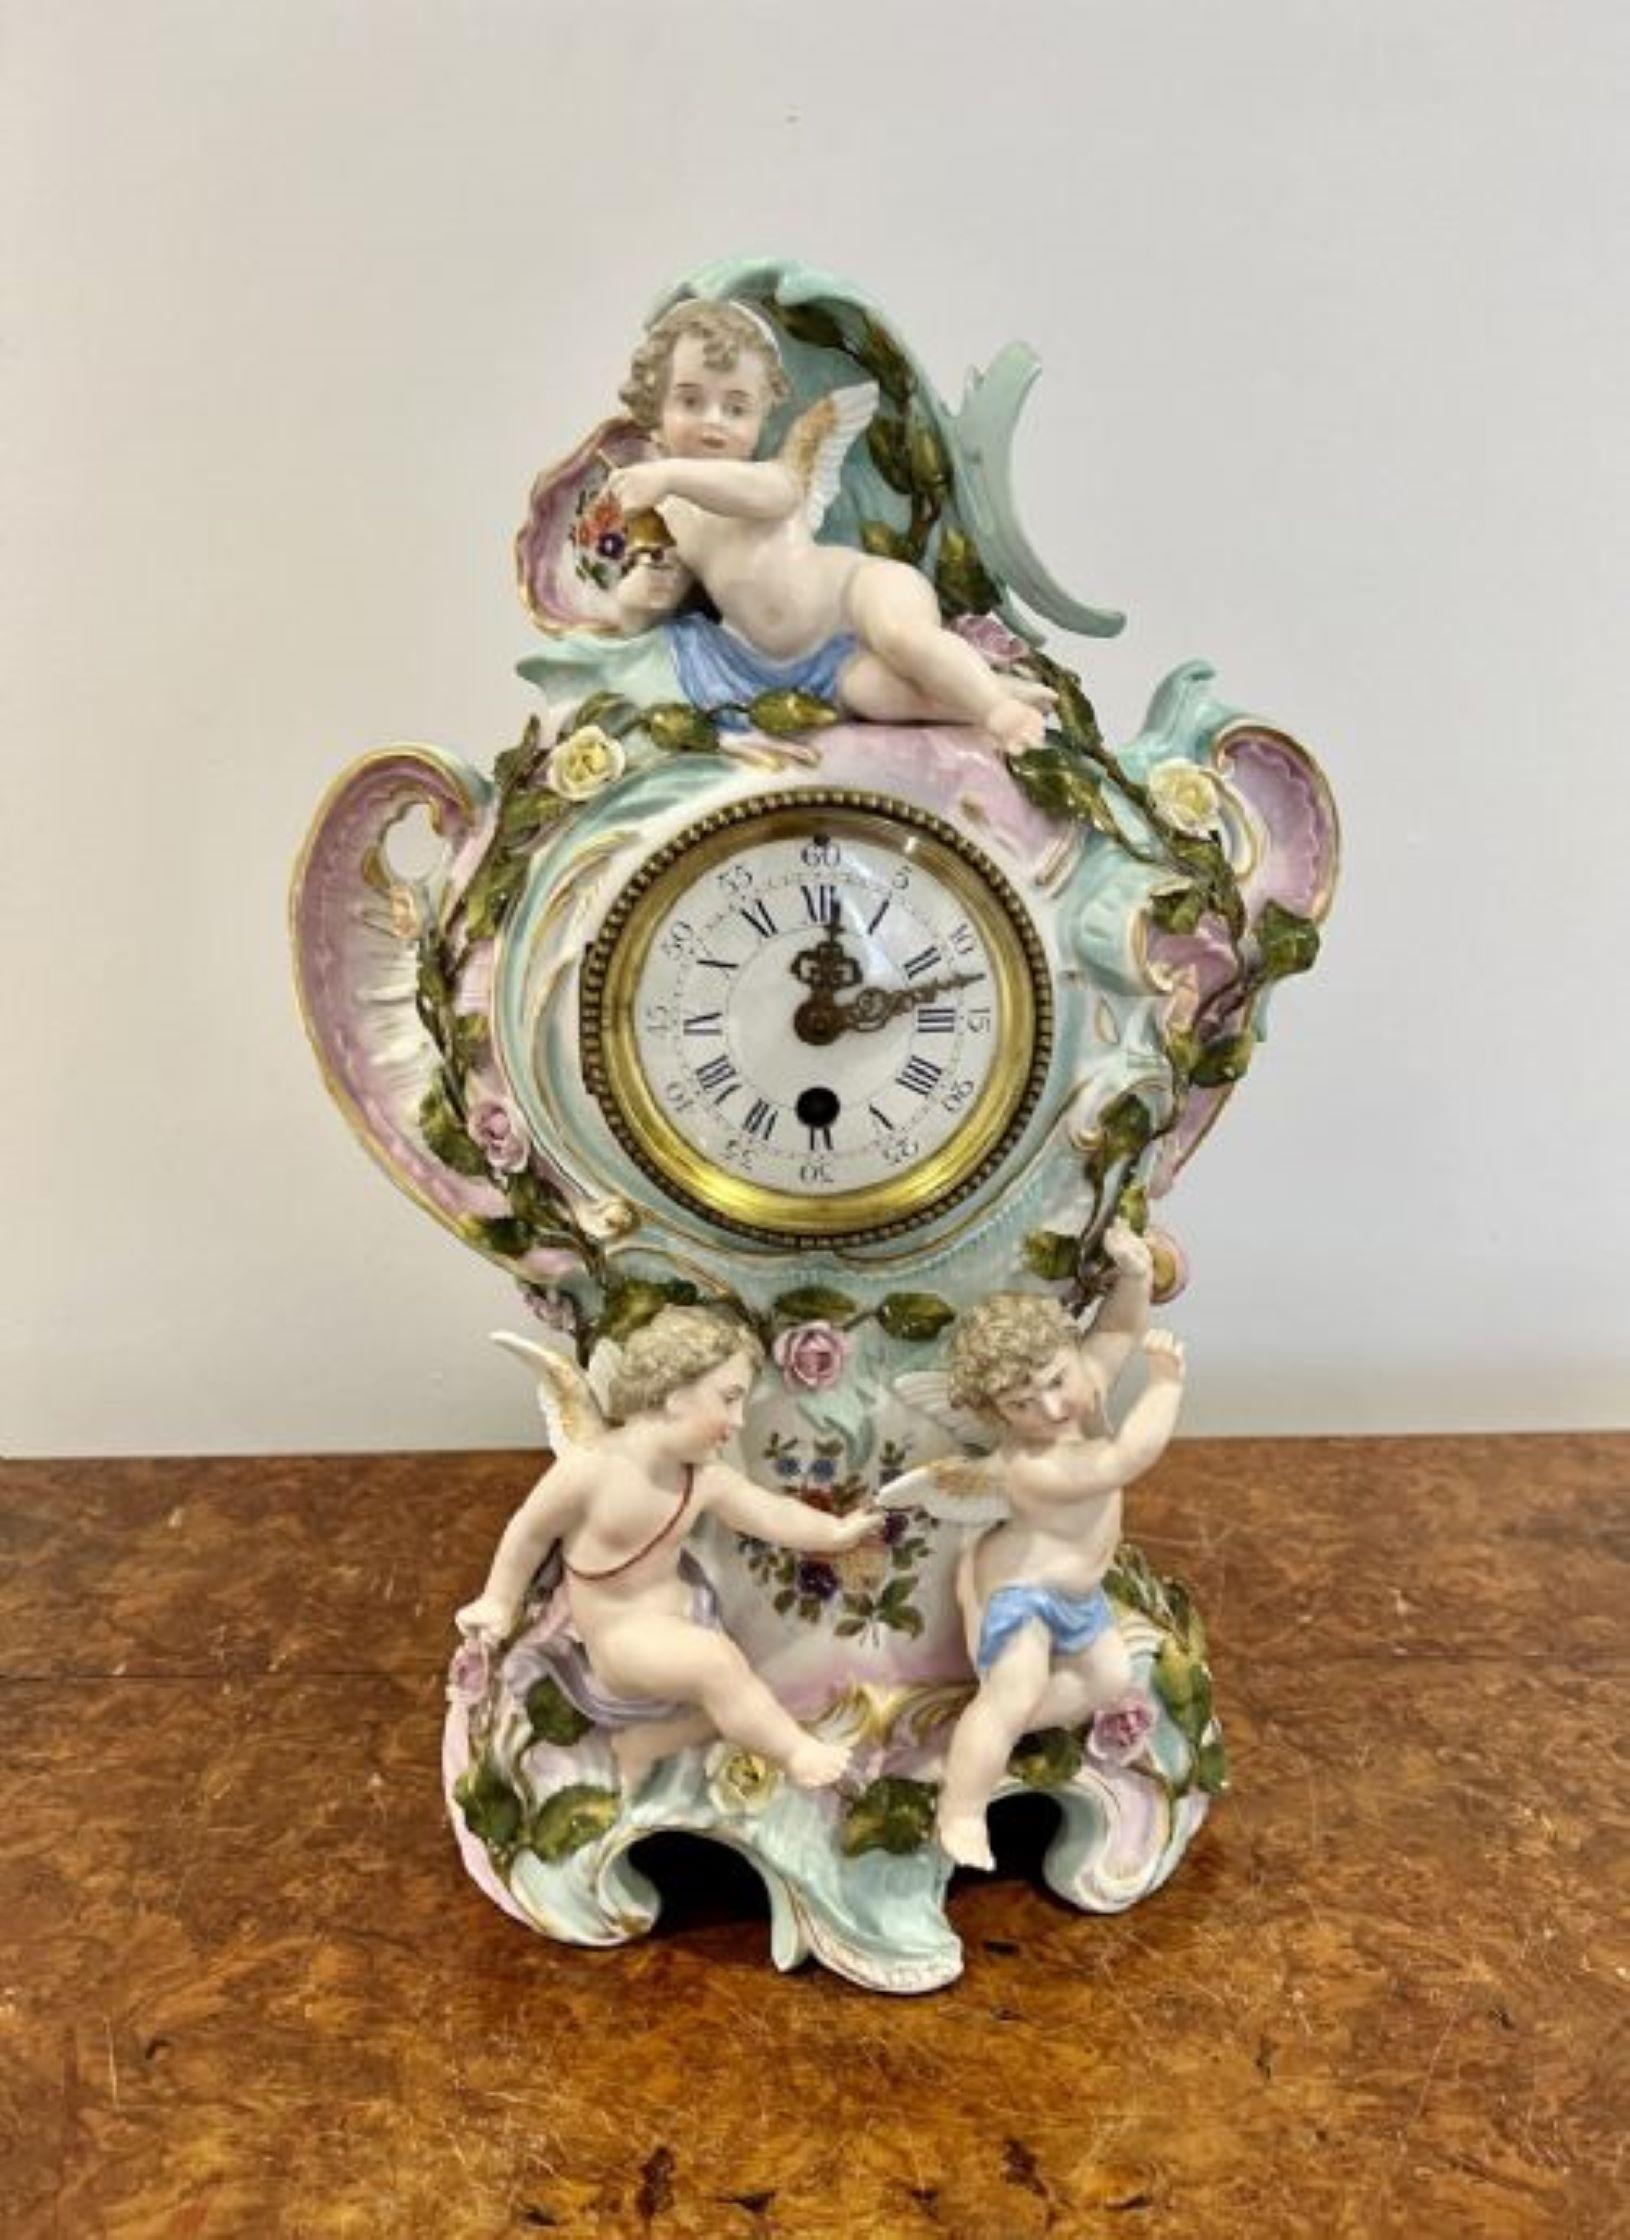 Antique Edwardian quality porcelain mantel clock, having a quality continental sitzendorf porcelain case with figures, flowers, leaves, swags and scrolls in wonderful blue, green, white and pink colours. Circular dial with original brass hands and